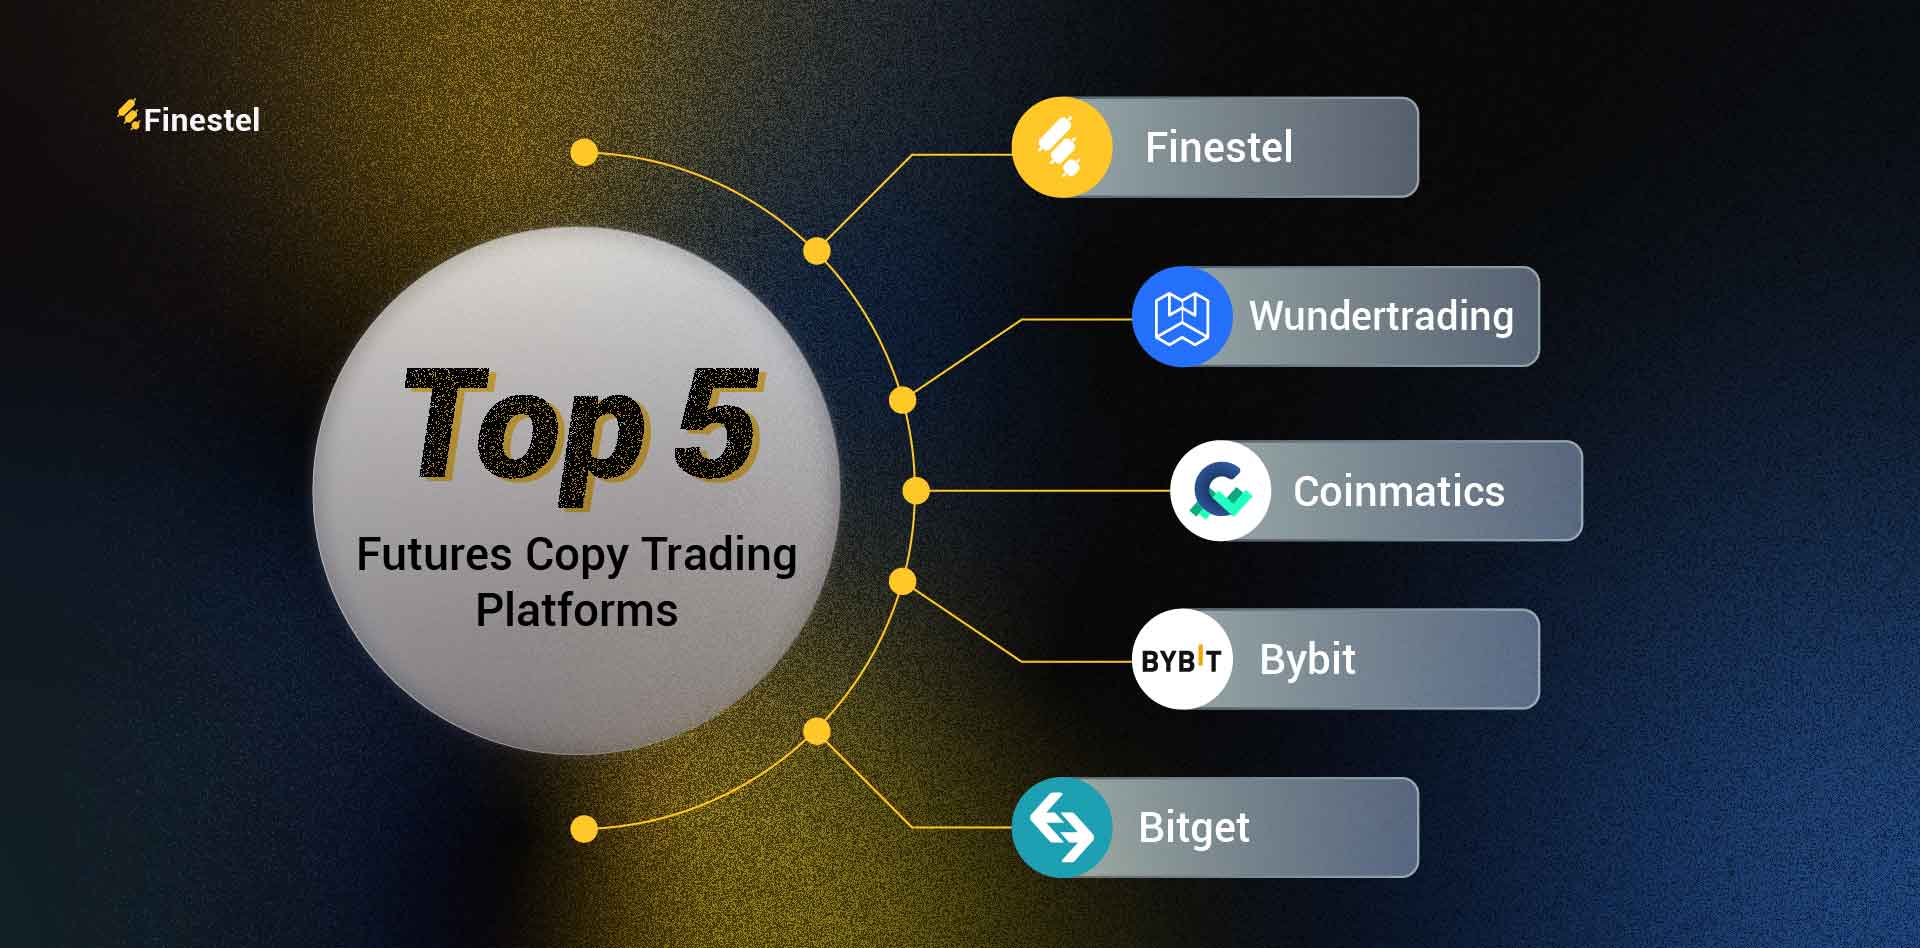 Copy Trading Platforms that support the Futures Market